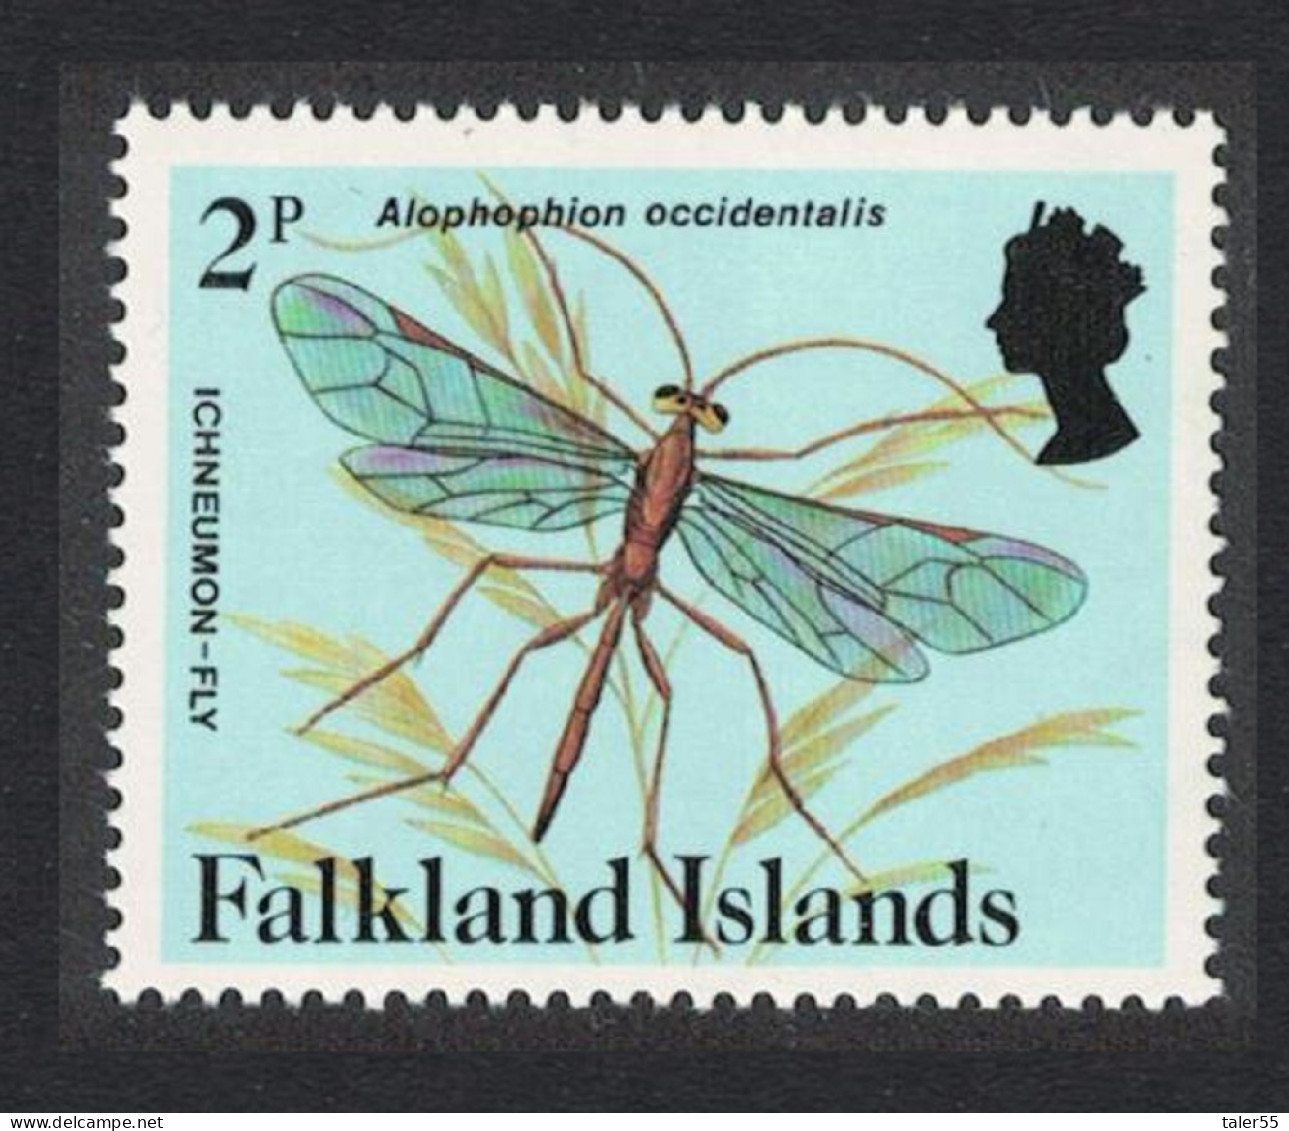 Falkland Is. Ichneumon Fly Insect 'Alophophin Occidentalis' 2p 1984 MNH SG#470a - Islas Malvinas